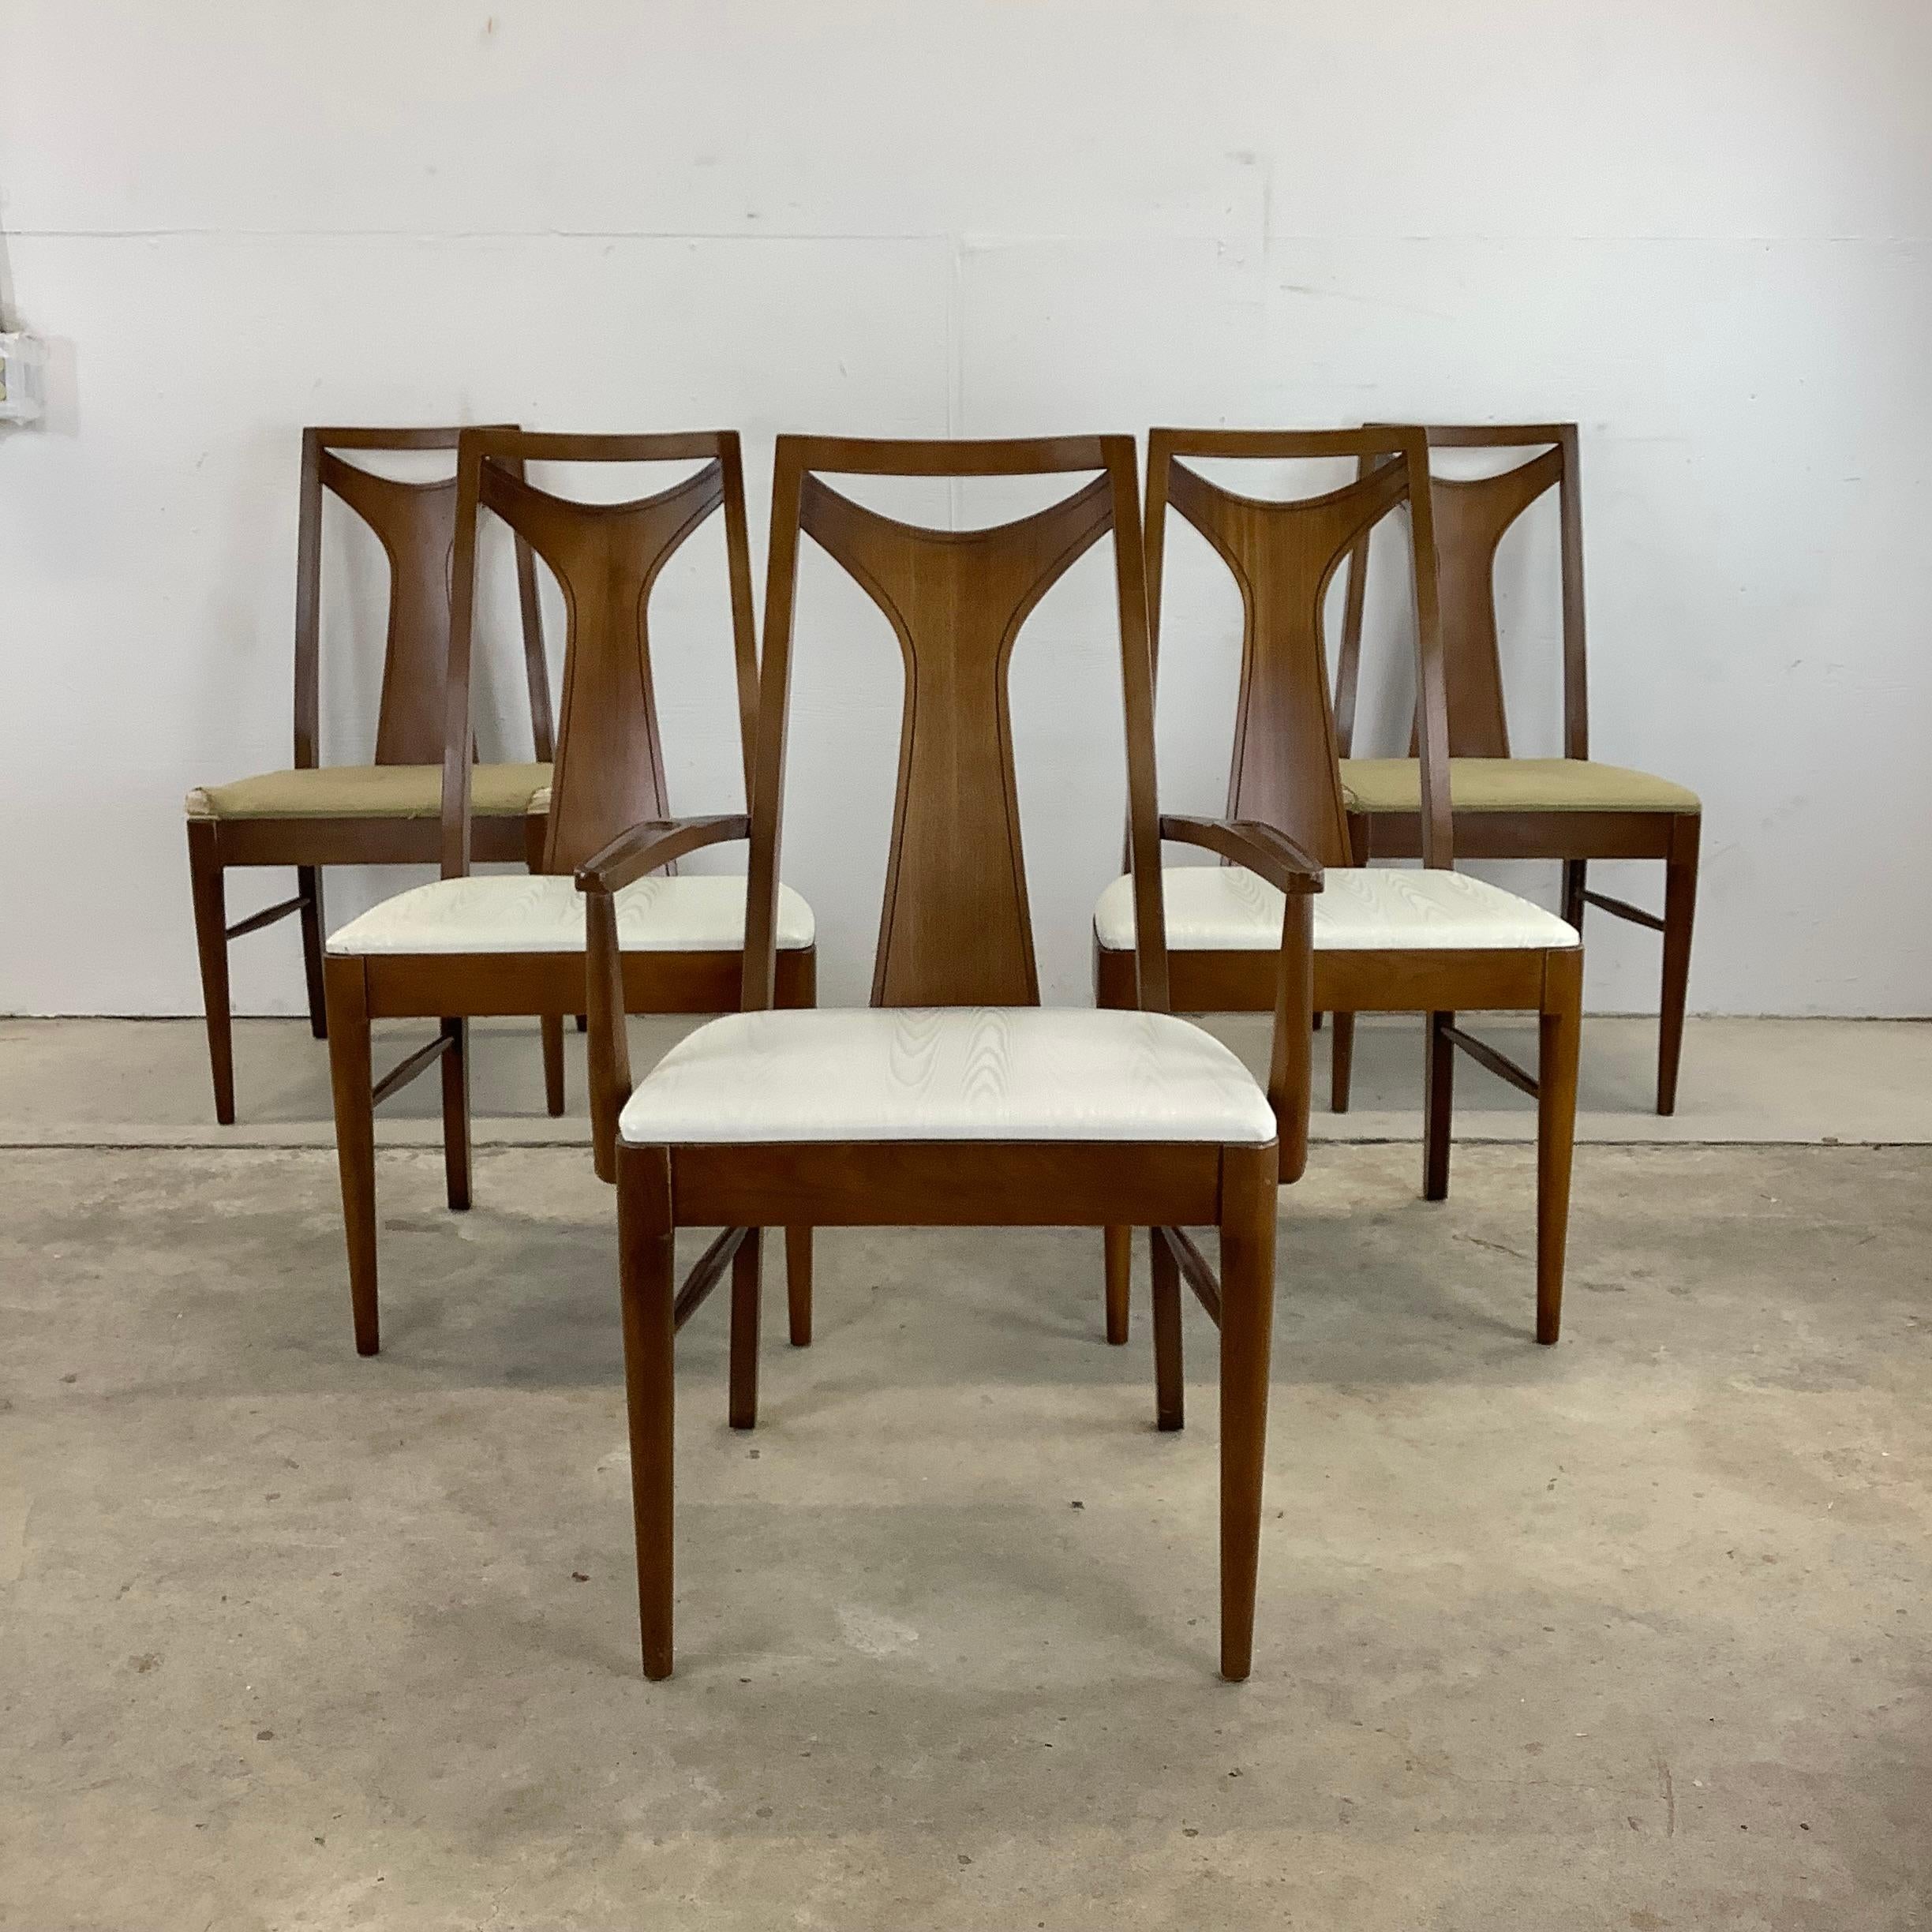 This set of five vintage walnut dining chairs from Kent Coffey's Perspecta line includes a set of four side chairs and matching armchair. The comfortable proportions and stylish highback design make these the perfect addition to any dining room